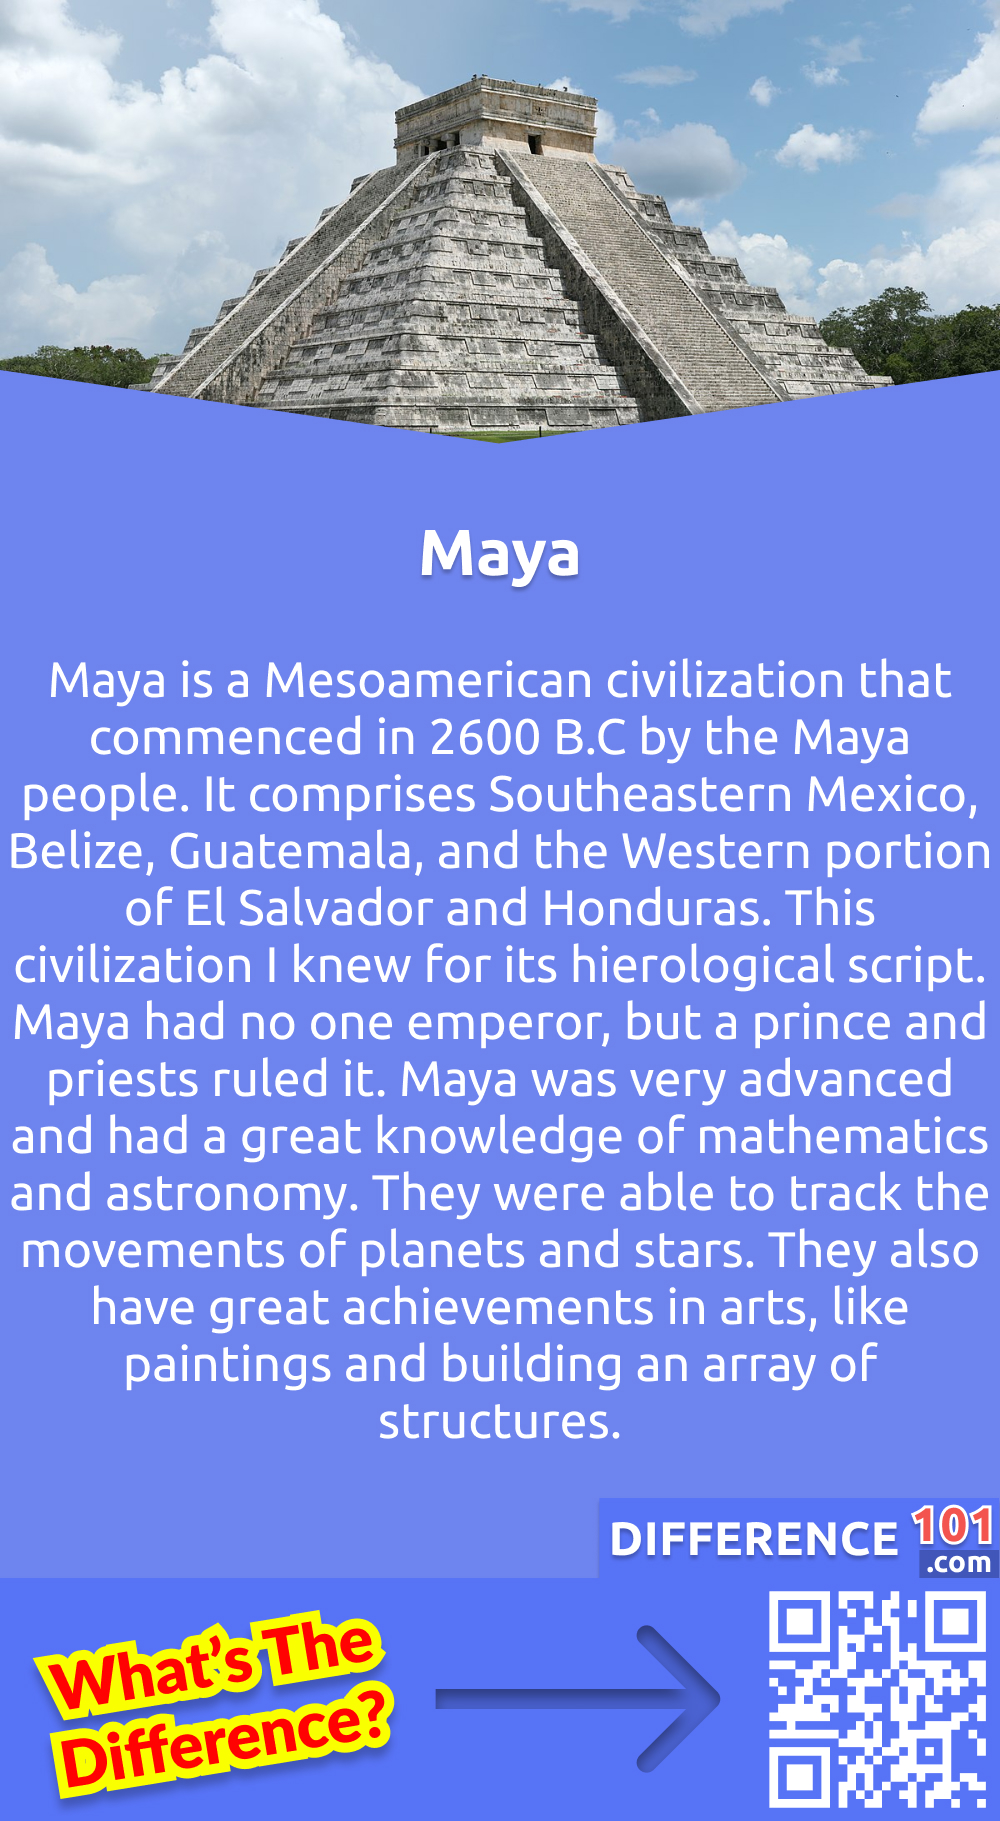 What Are Maya? Maya is a Mesoamerican civilization that commenced in 2600 B.C by the Maya people. It comprises Southeastern Mexico, Belize, Guatemala, and the Western portion of El Salvador and Honduras. This civilization I knew for its hierological script. Maya had no one emperor, but a prince and priests ruled it. Maya was very advanced and had a great knowledge of mathematics and astronomy. They were able to track the movements of planets and stars. They also have great achievements in arts, like paintings and building an array of structures.